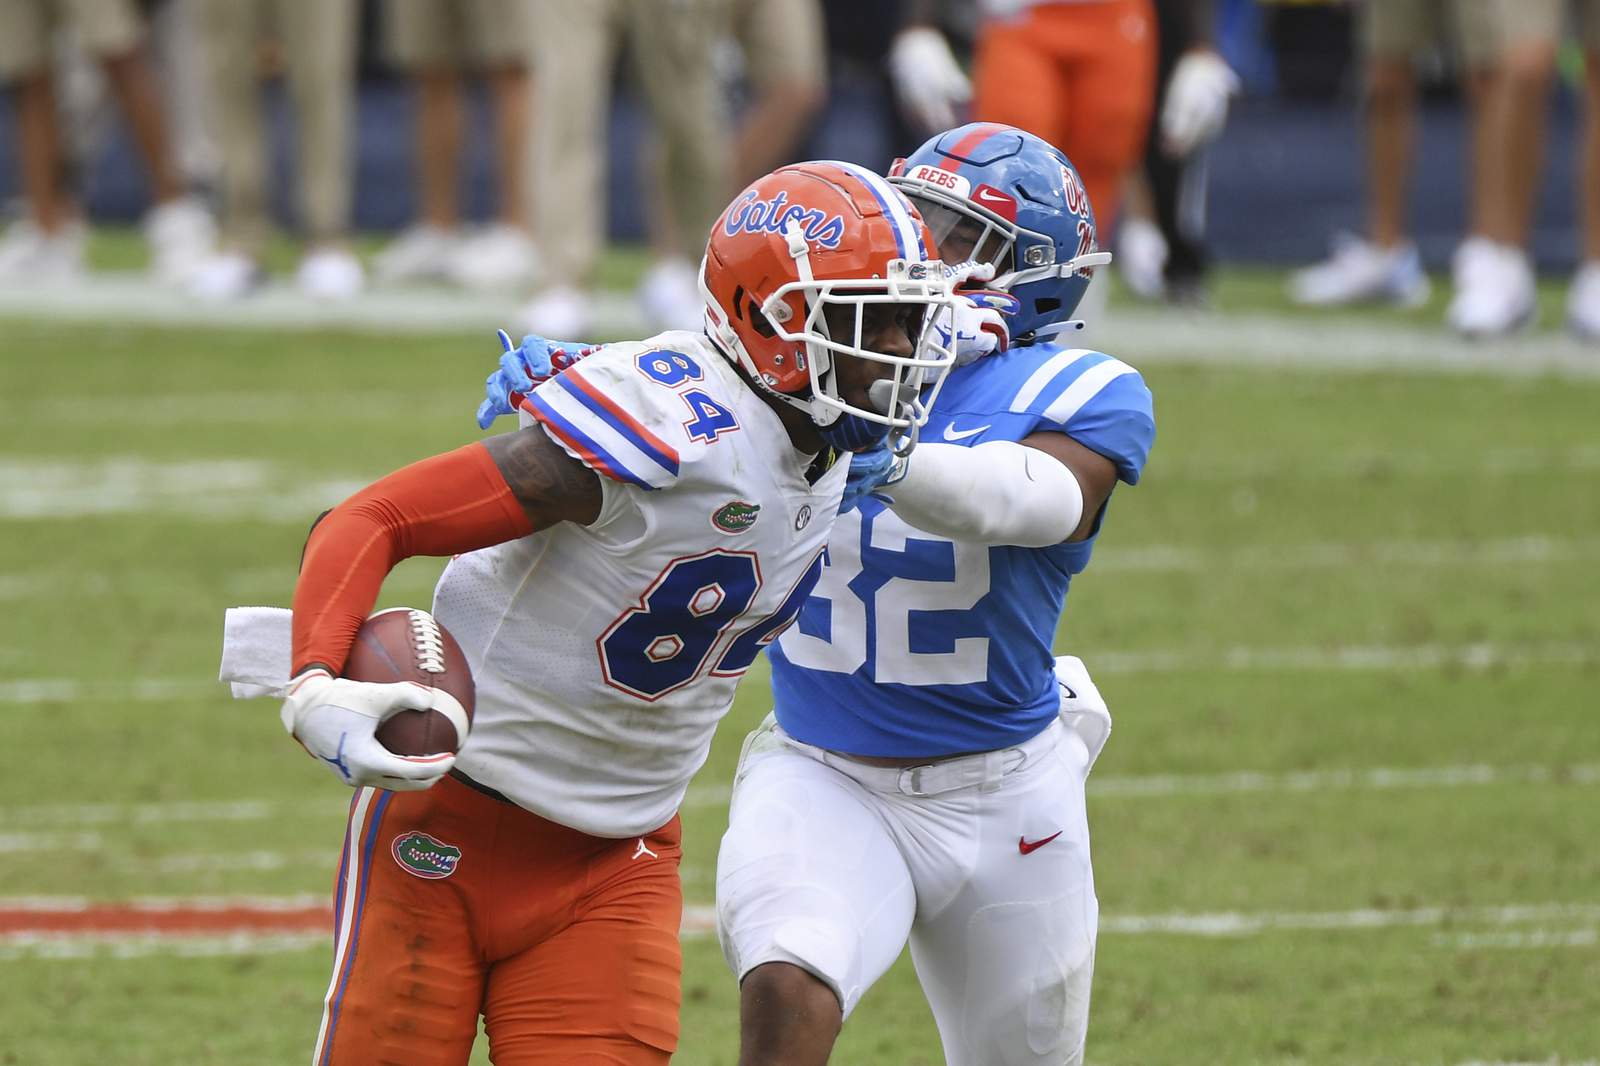 No. 5 Florida beats Ole Miss 51-35 in Kiffin’s debut